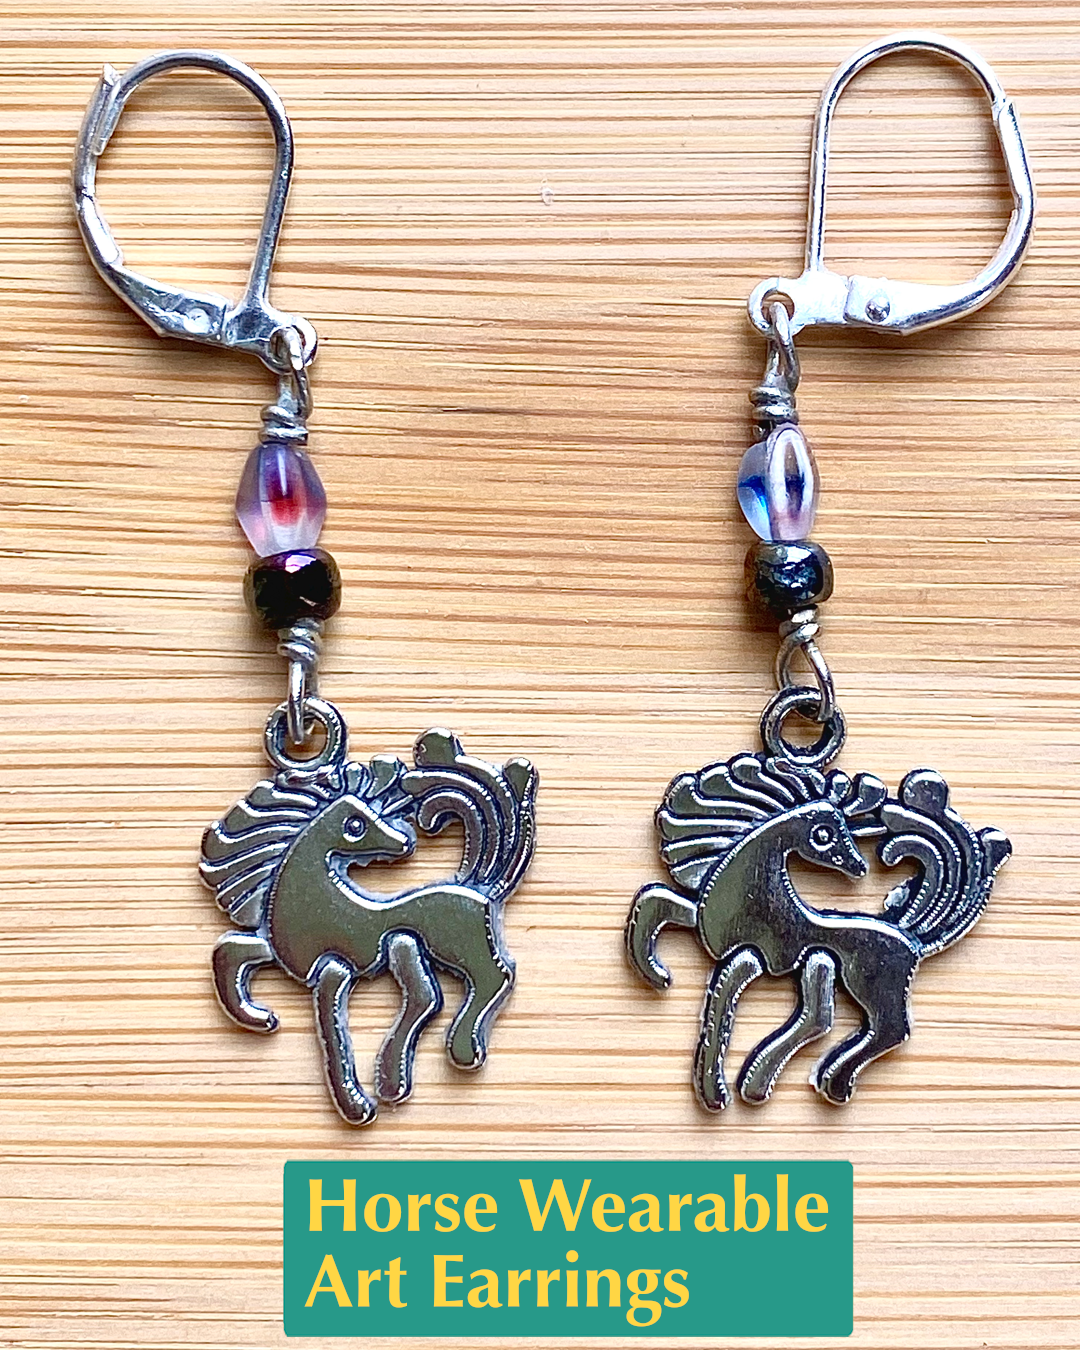 Handmade silver lever back earrings featuring a silver dancing horse charm and salvaged beads (white with blue and purple speckles and iridescent green and blue).  The earrings look like dancing unicorns!